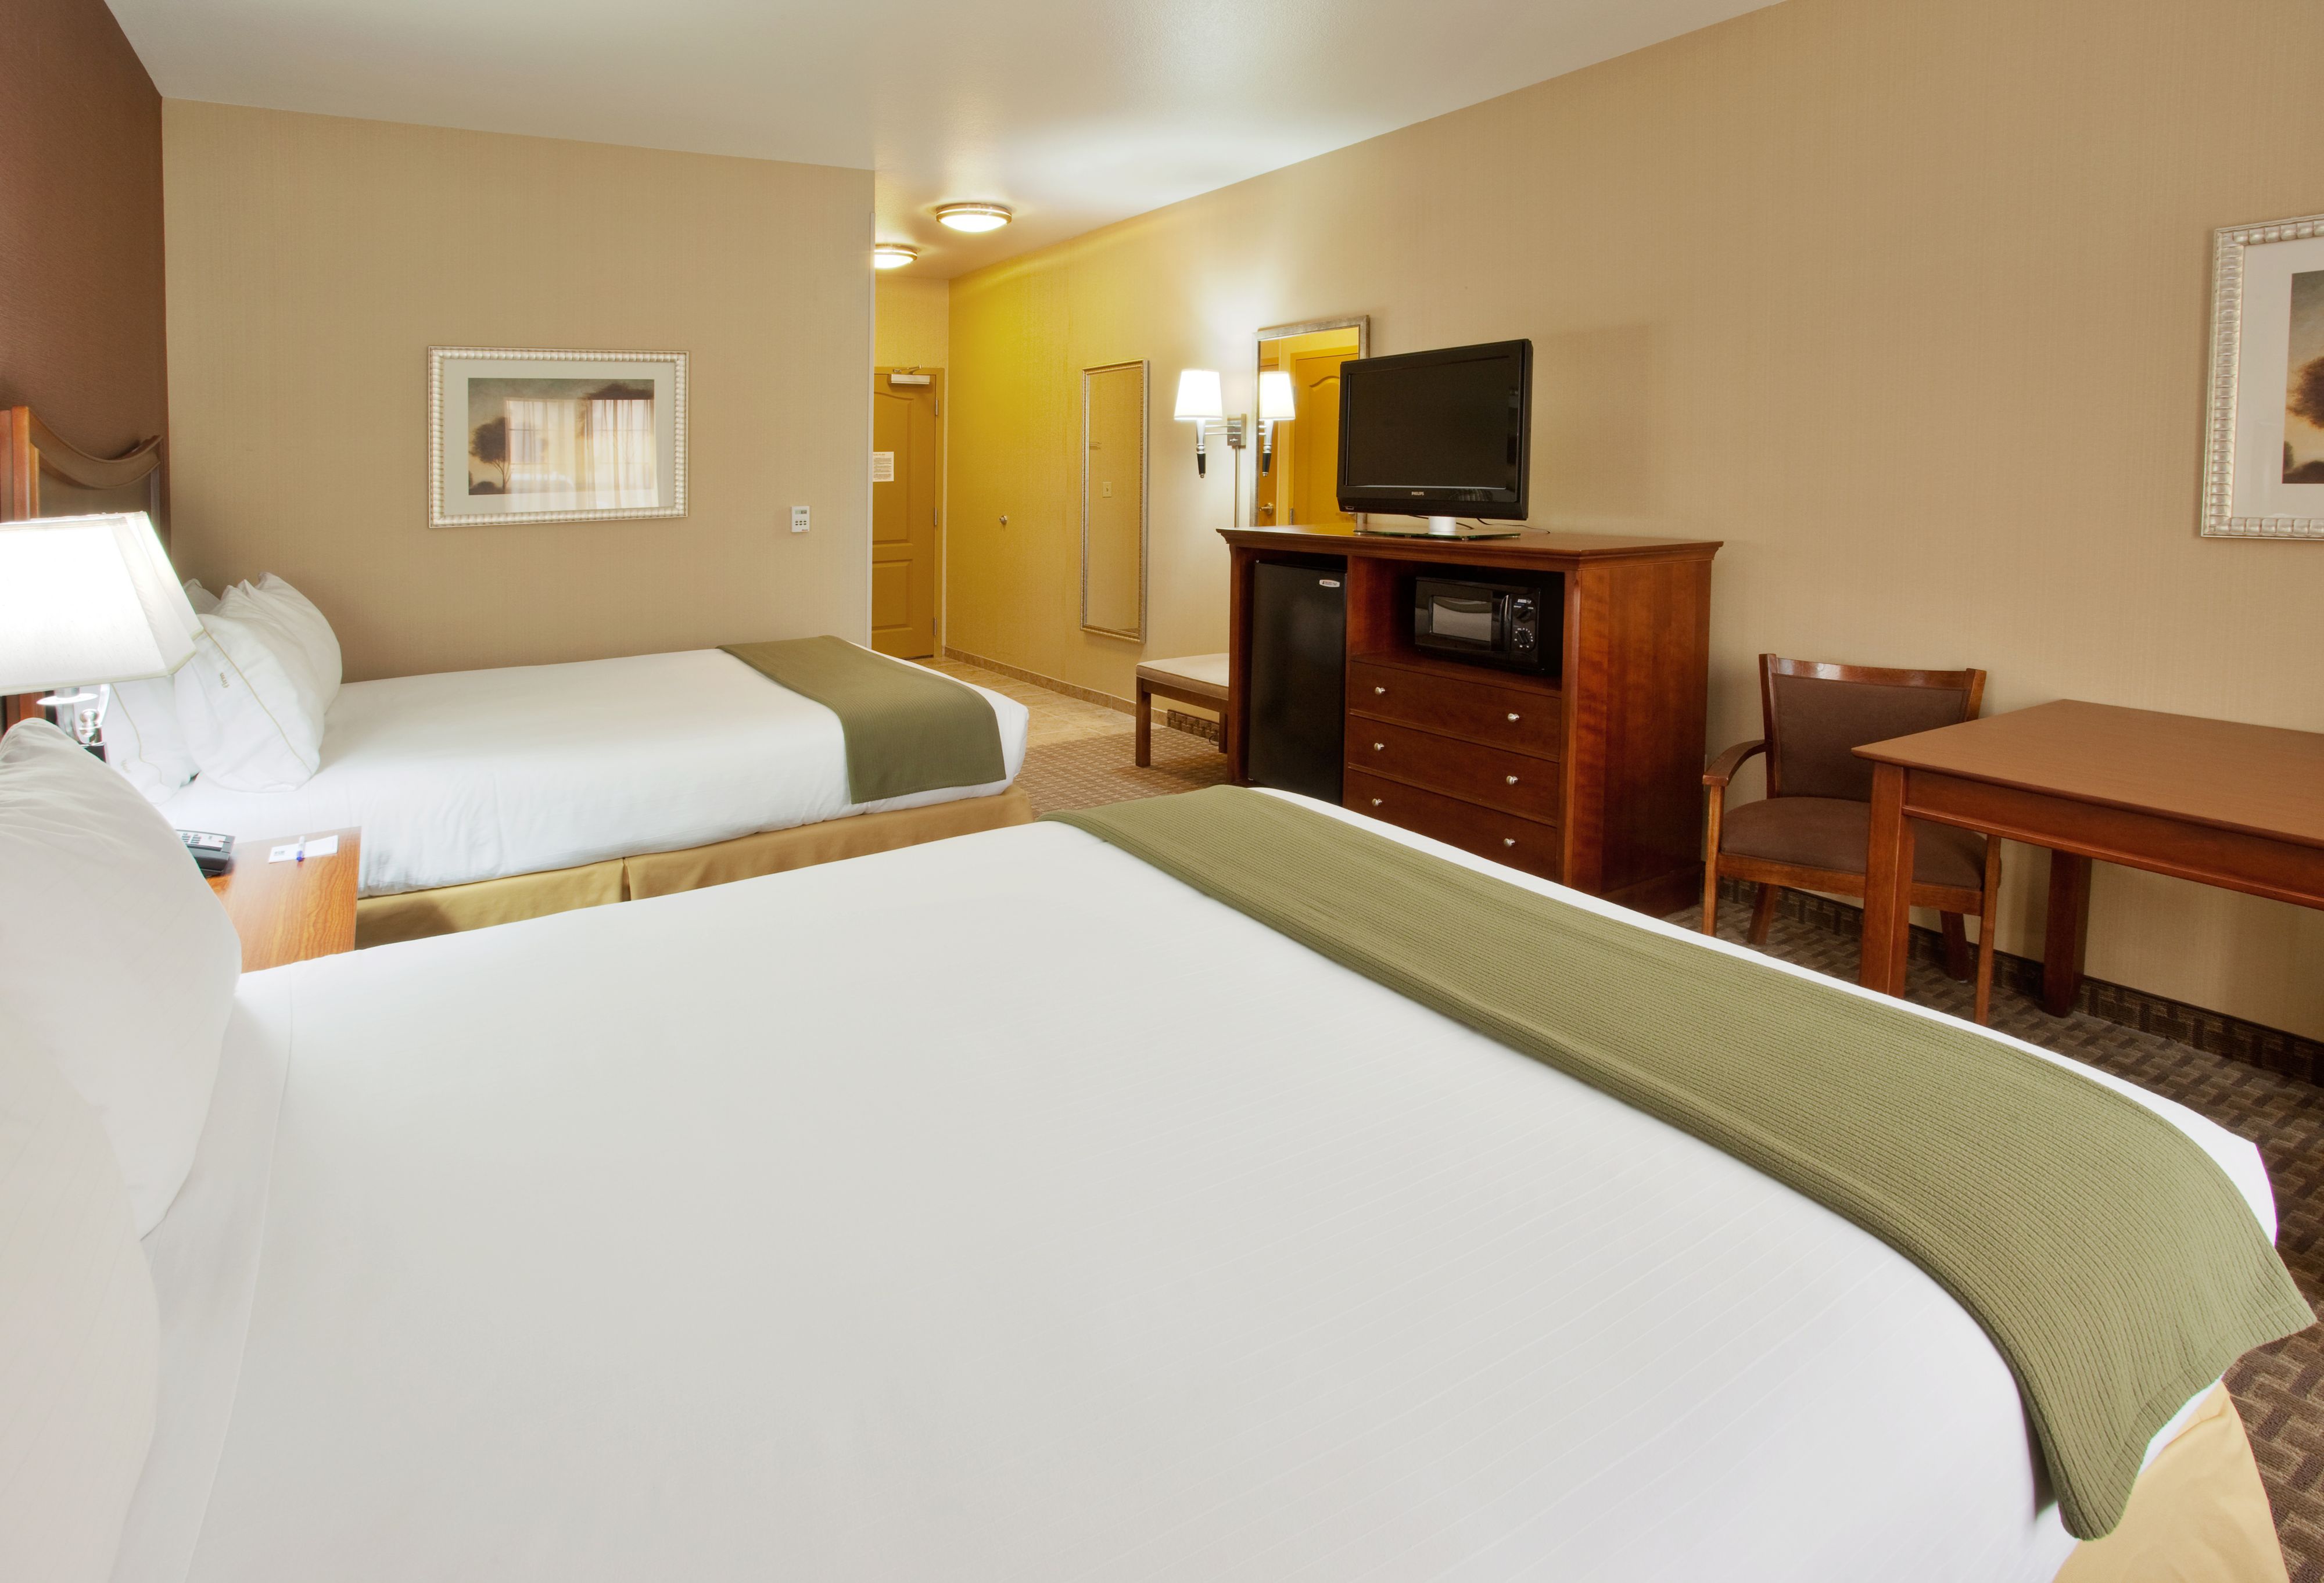 holiday-inn-express-and-suites-willows-2532849910-original.jpg